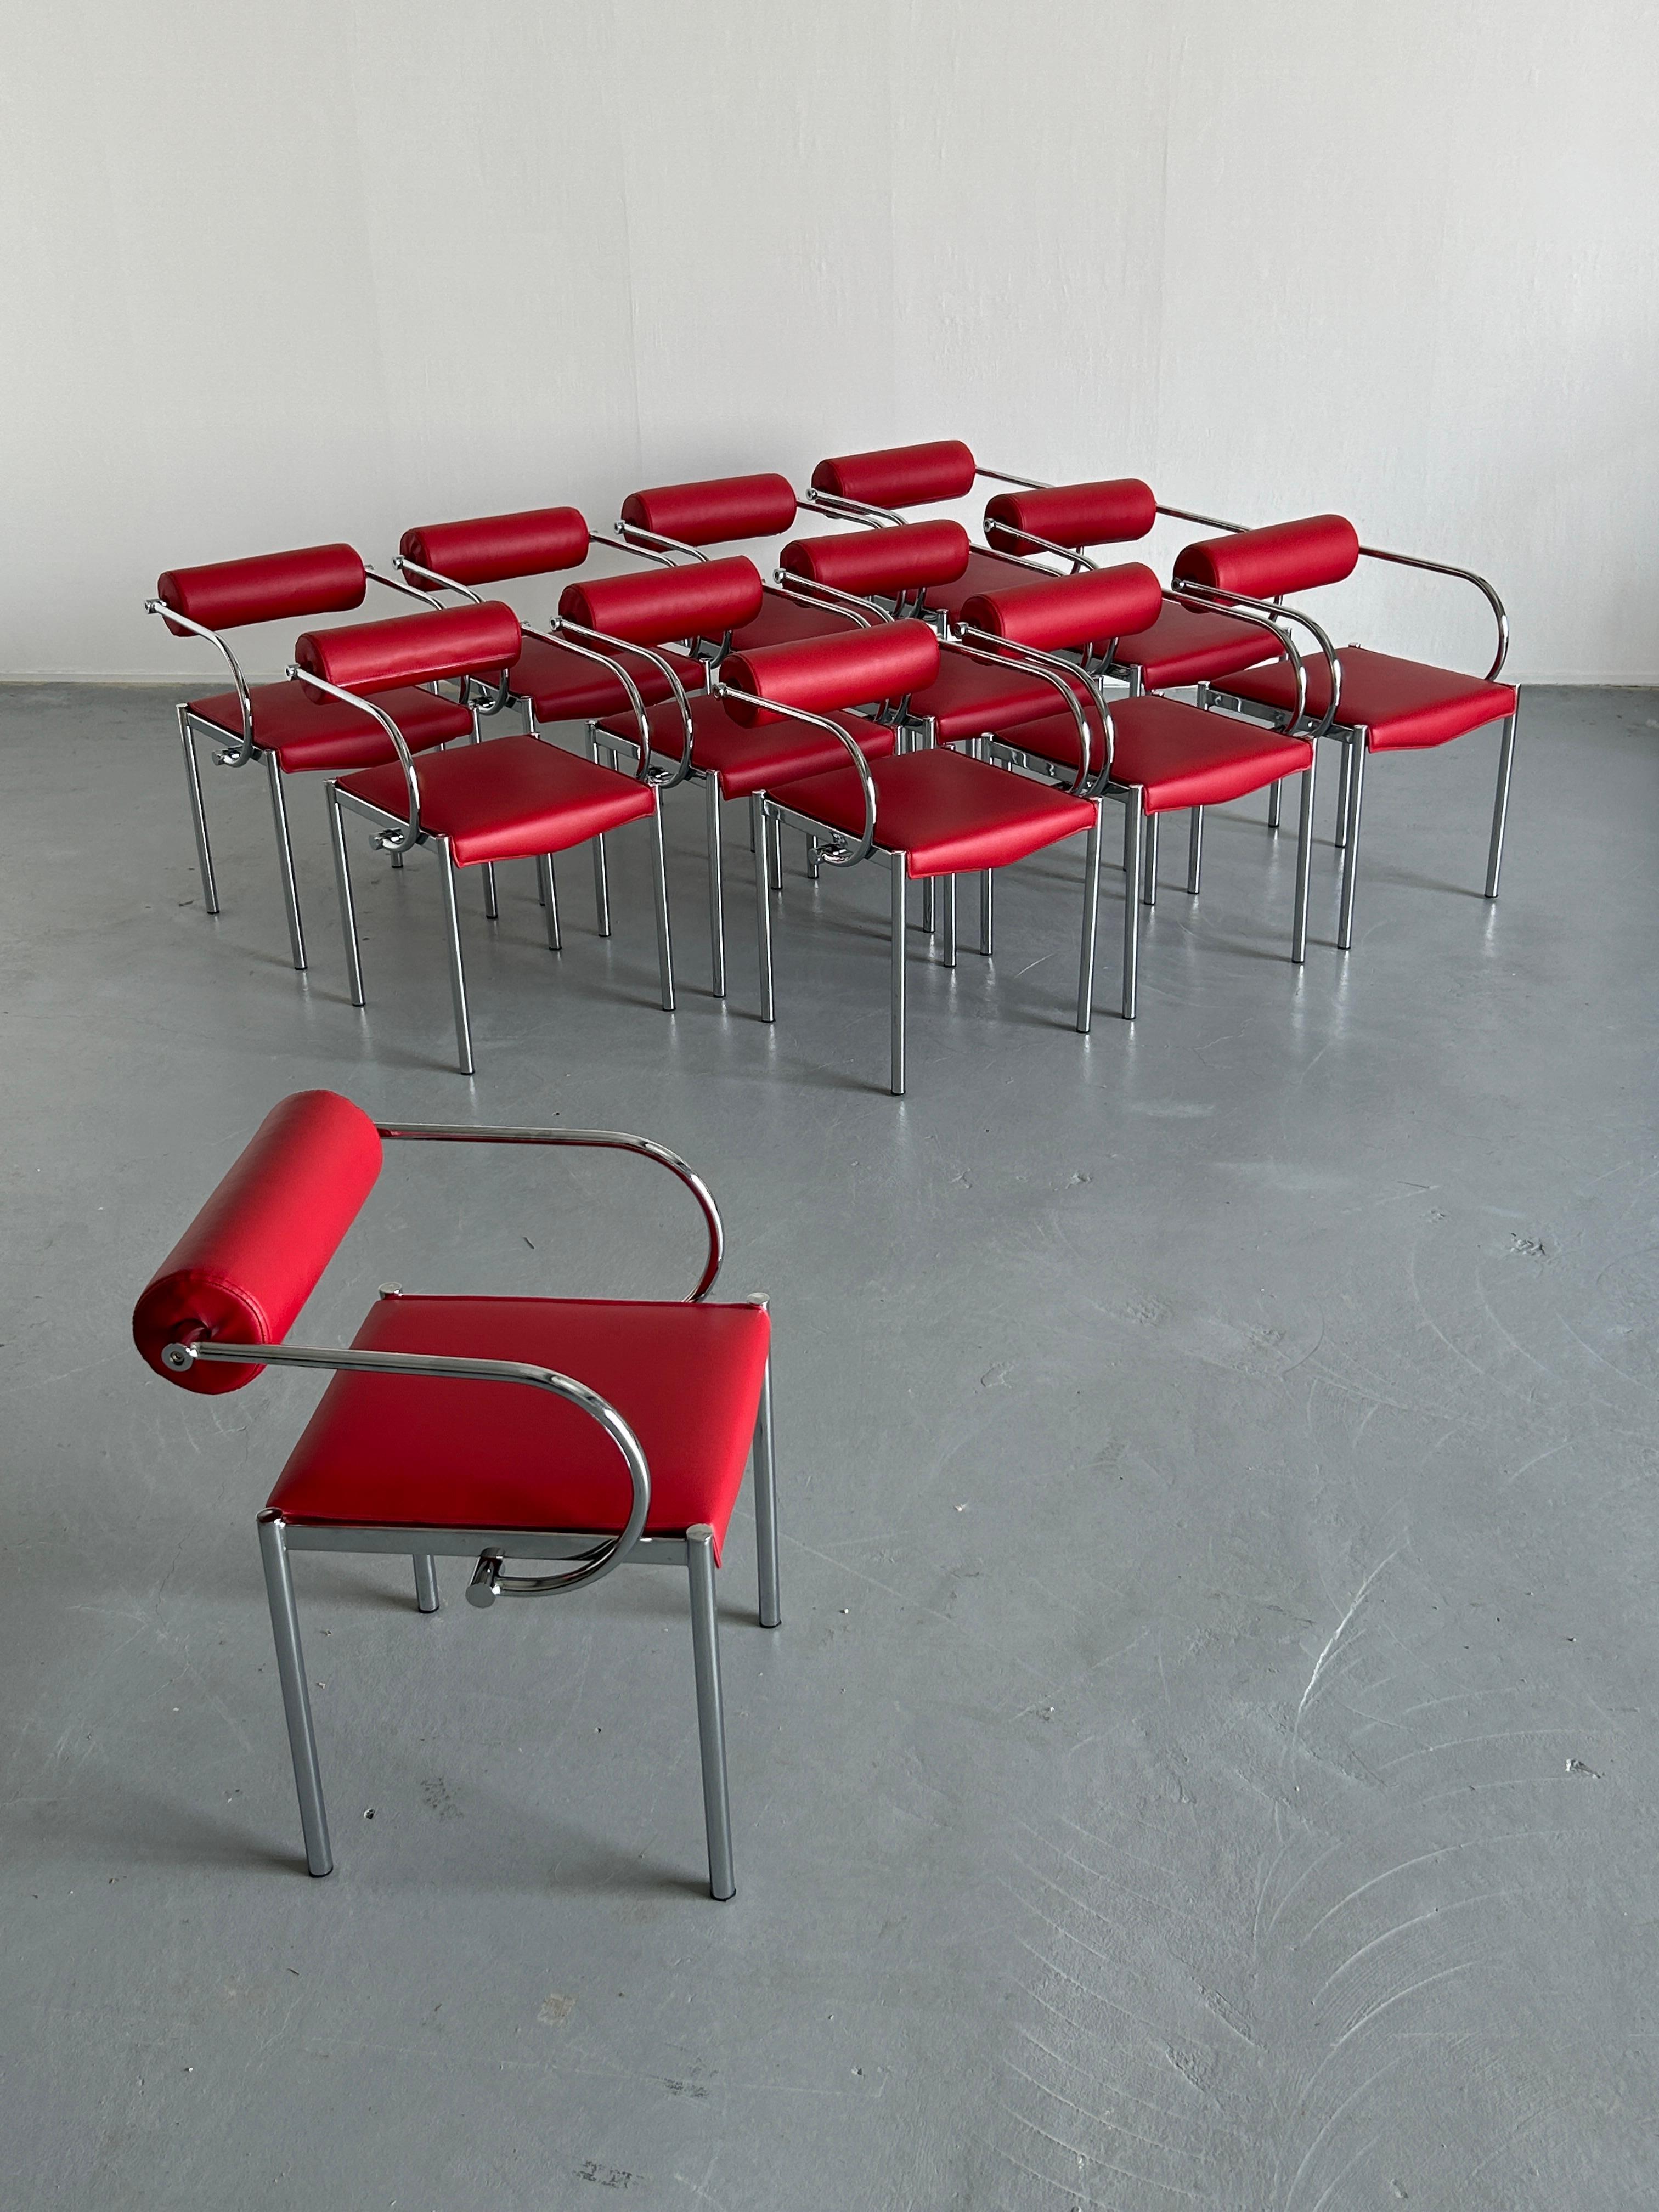 Mid-Century Modern Vintage Postmodern Tubular Chairs in the style of Arcadia Chairs by Paolo Piva